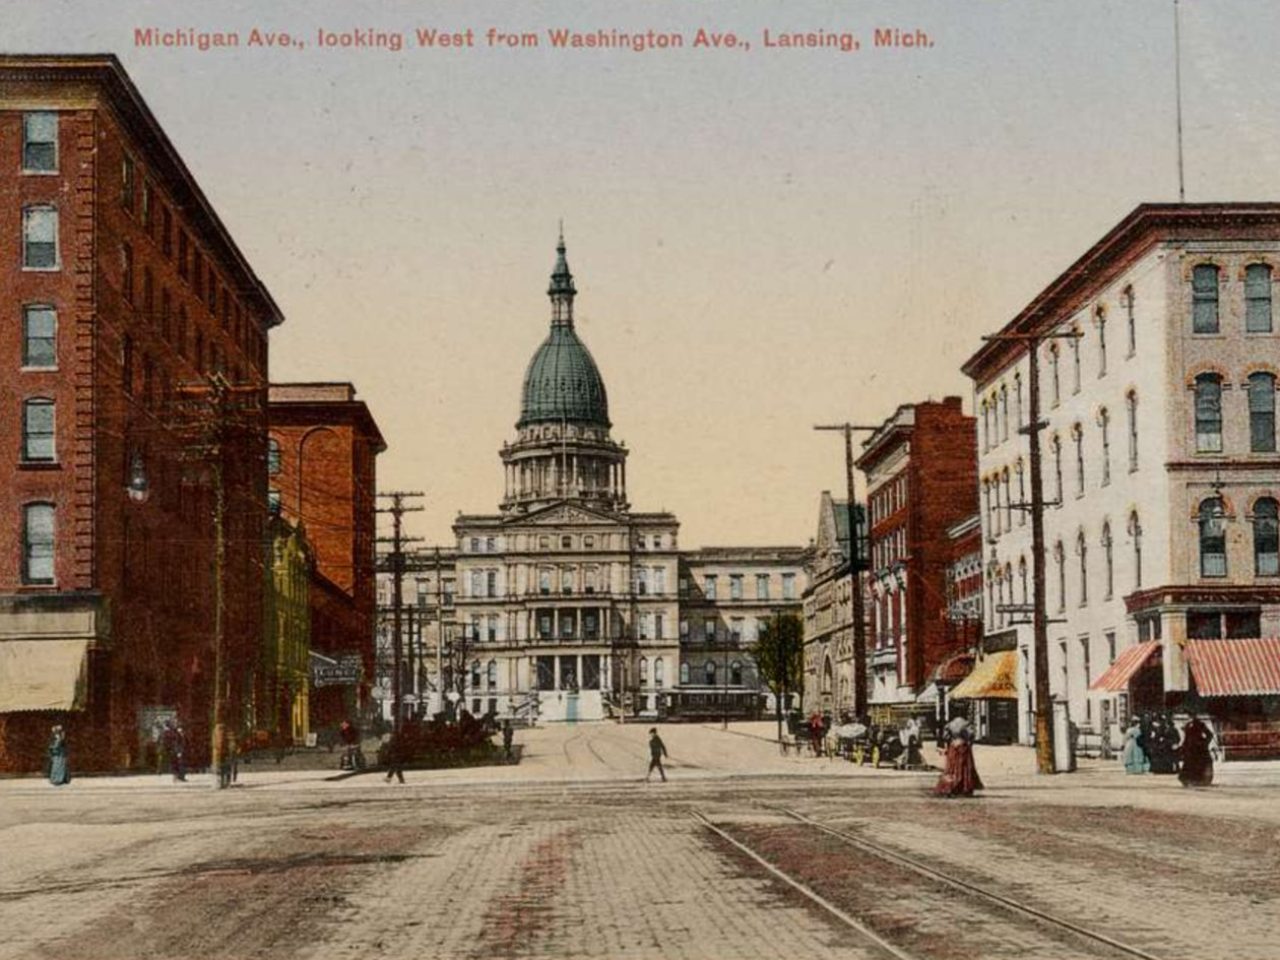 Michigan Ave., looking west from Washington Ave., Lansing, Mich.